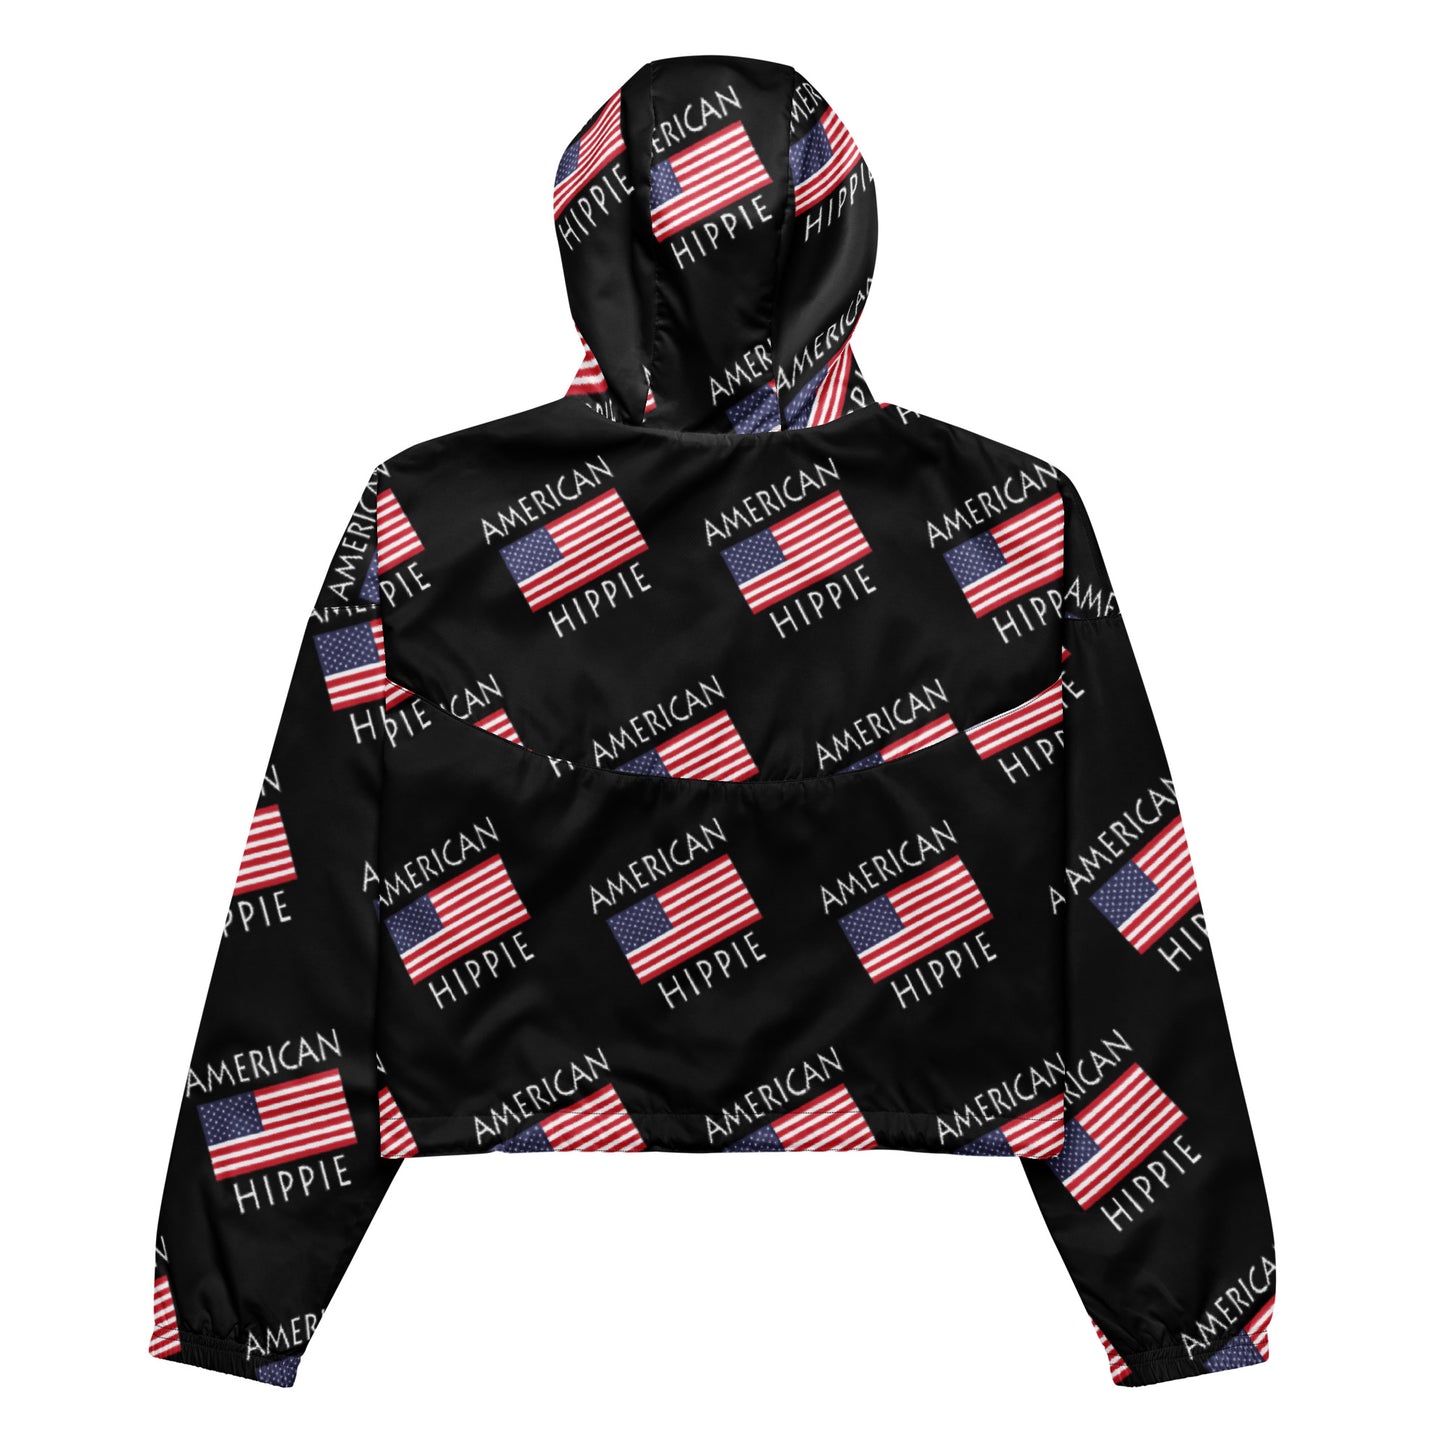 This American Flag Hippie stylish cropped half-zip windbreaker is a fashion statement! The repeating American Flag Hippie design is the coolest, hippest, trendiest piece in your wardrobe! Hike in style without the rain getting in the way...this cropped windbreaker is lightweight, waterproof, and suitable for every kind of adventure. Features include side-slit pockets, breathable mesh lining, and adjustable draw cords on the hood and waist to support all your stylish outdoor looks.